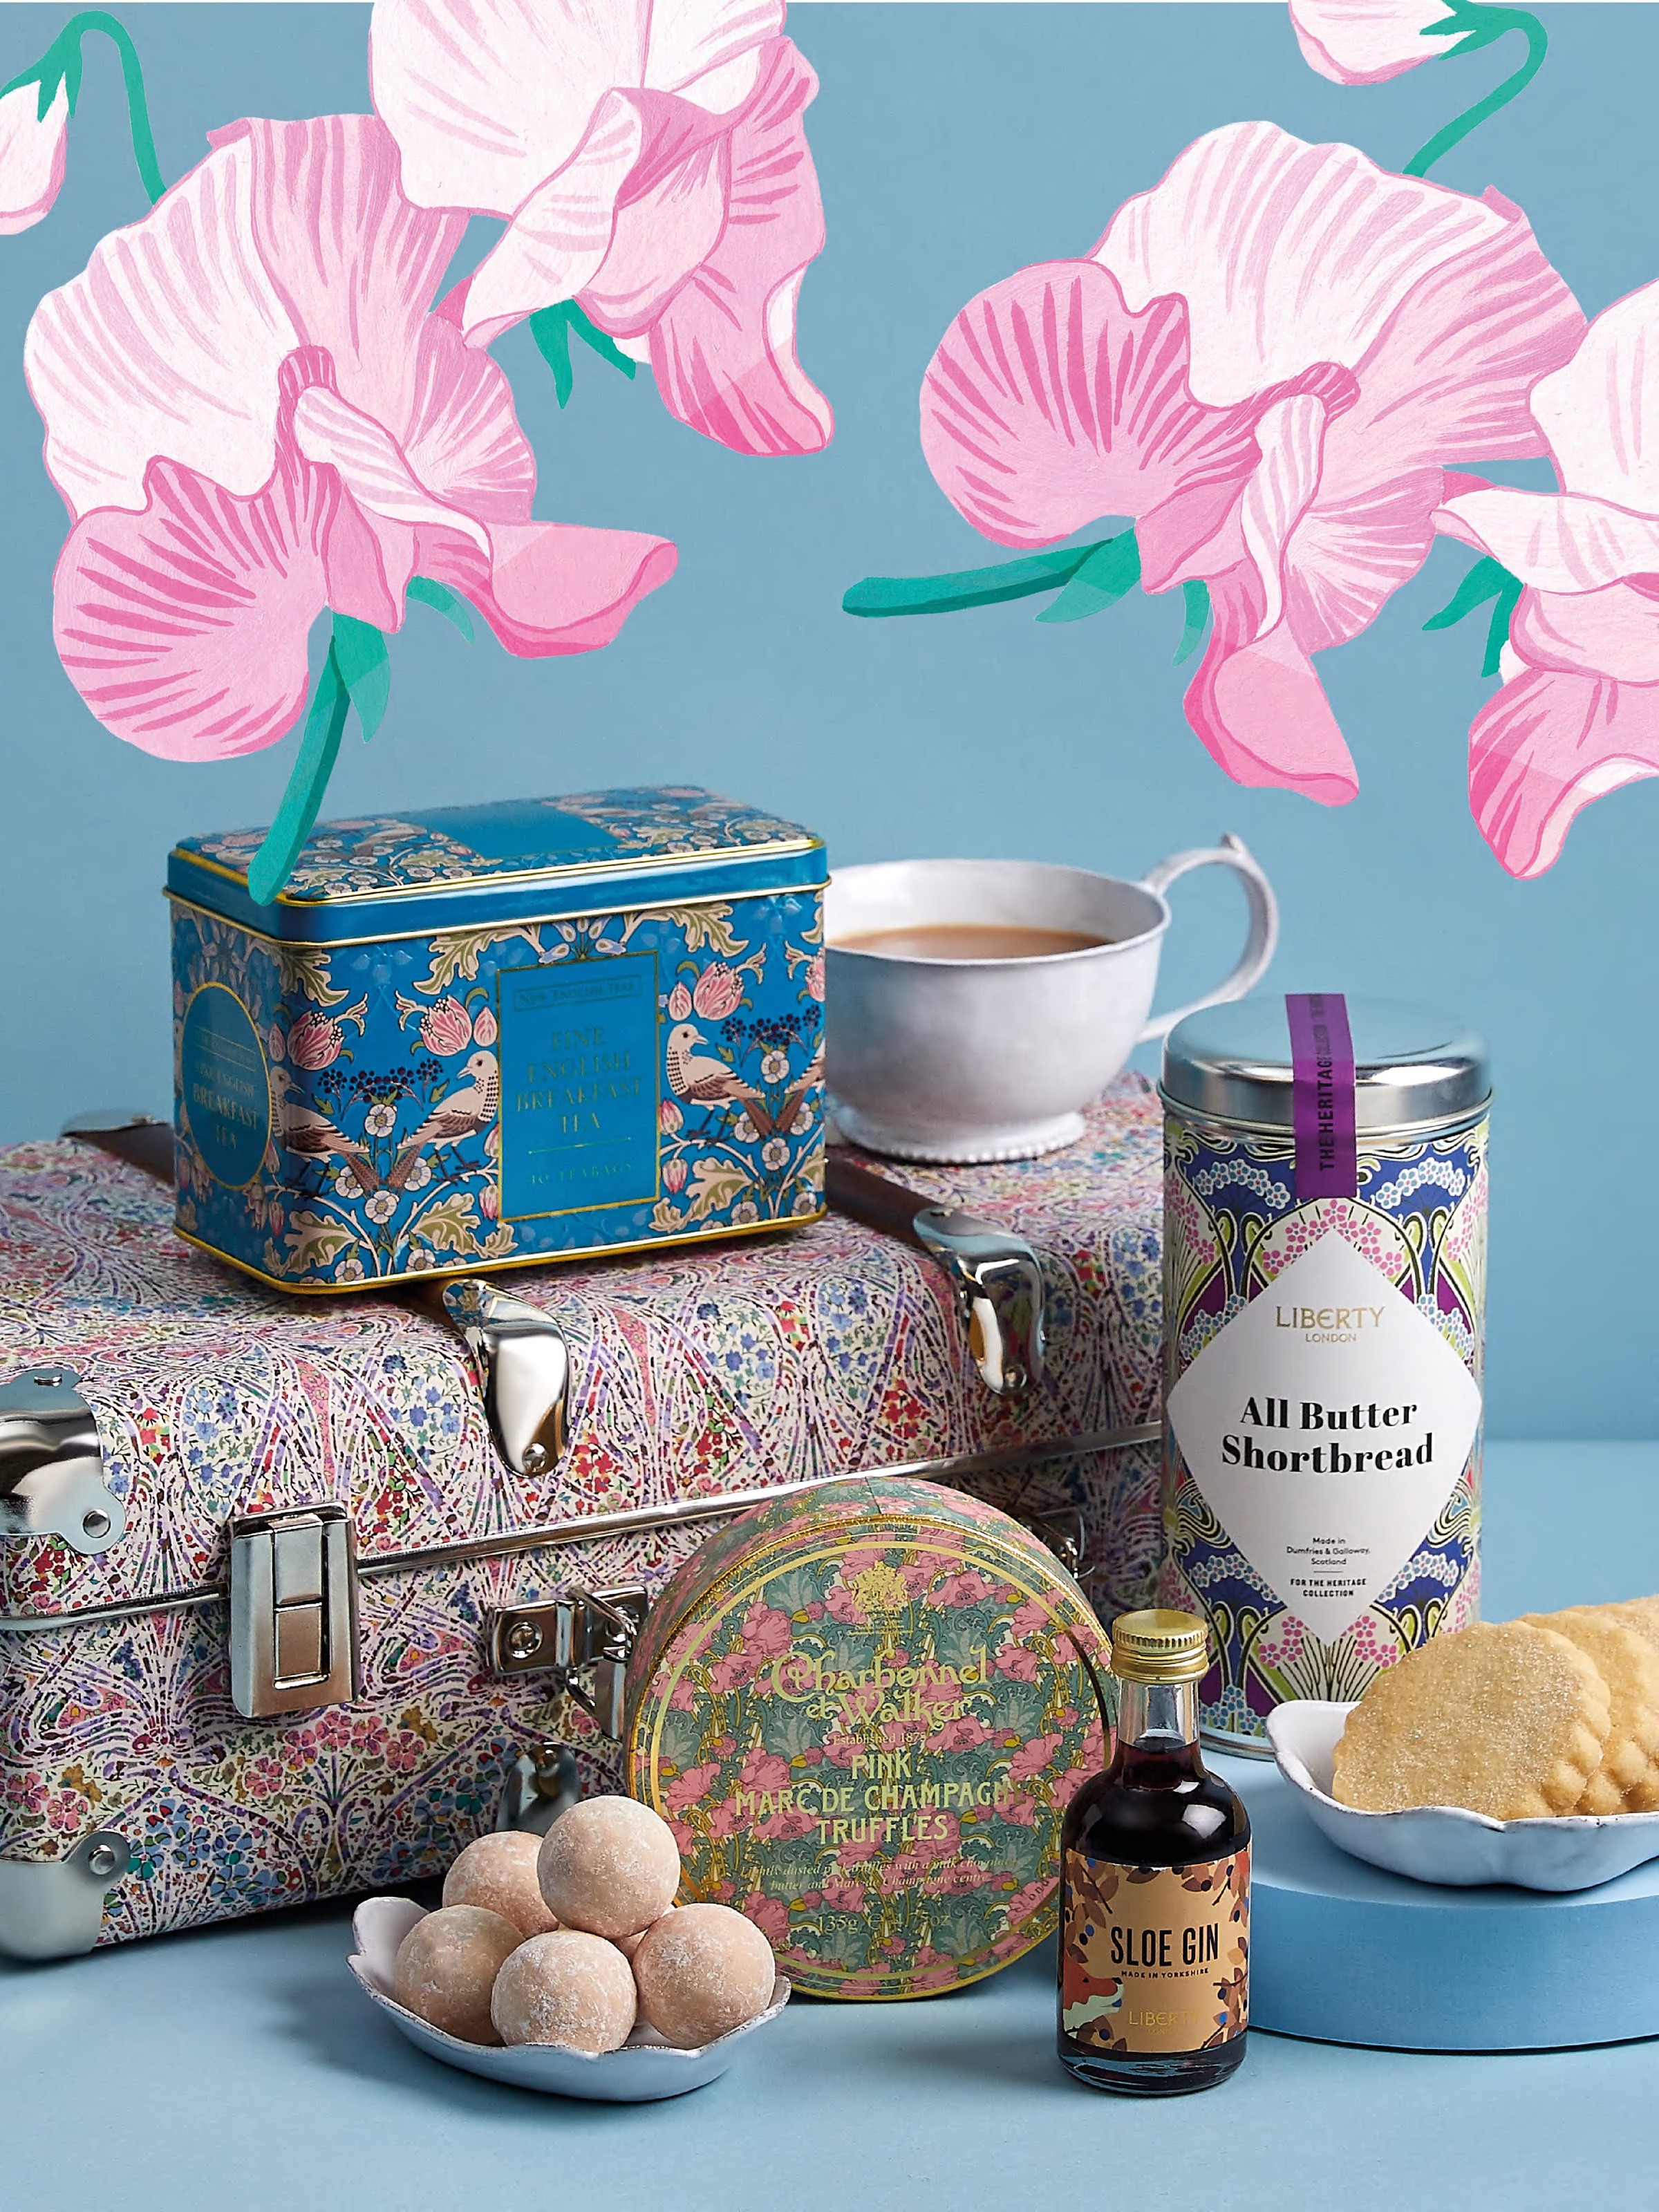 Liberty Mother's Day Hamper